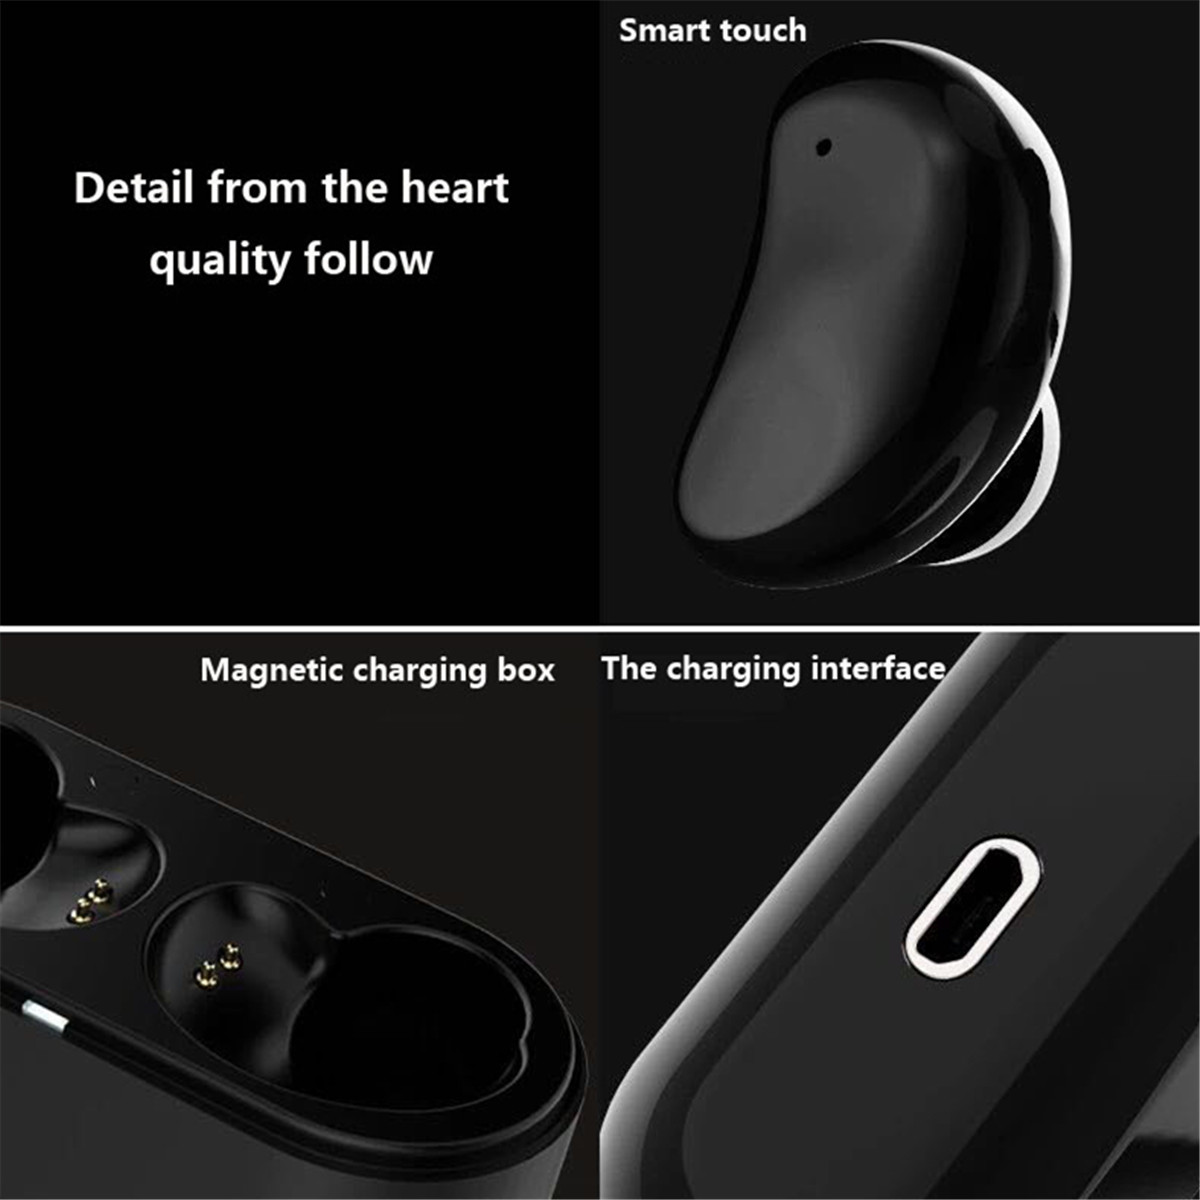 REMAX-TWS-5-bluetooth-50-Stereo-True-Wireless-Earbuds-Touch-Music-Handsfree-Earphone-With-HD-Mic-1459655-4